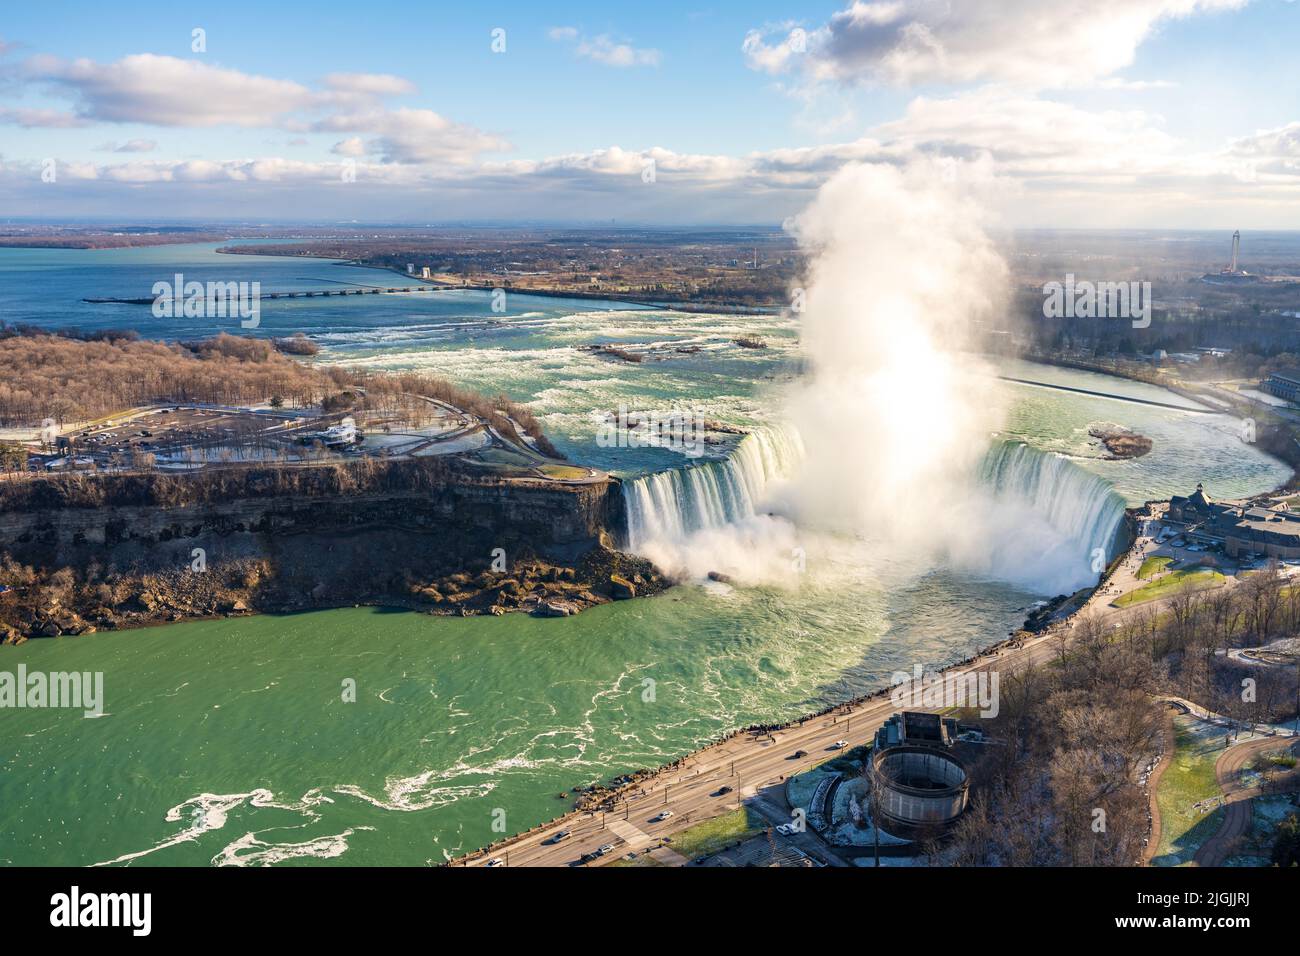 Overlooking the Niagara River Horseshoe Falls in a sunny day. Stock Photo